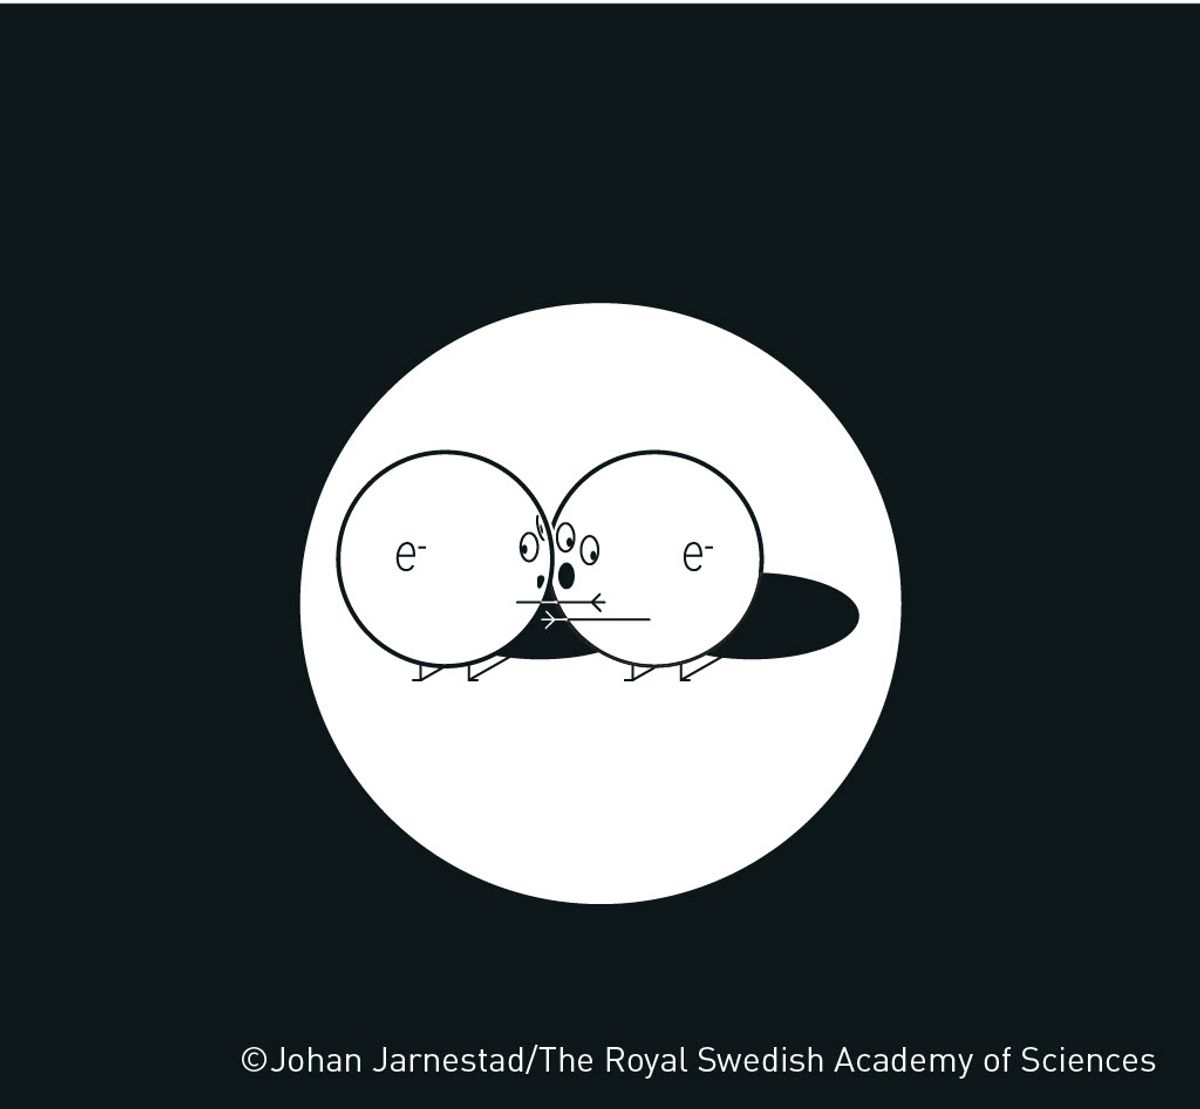 Black and white cartoon of two electrons under a spotlight.